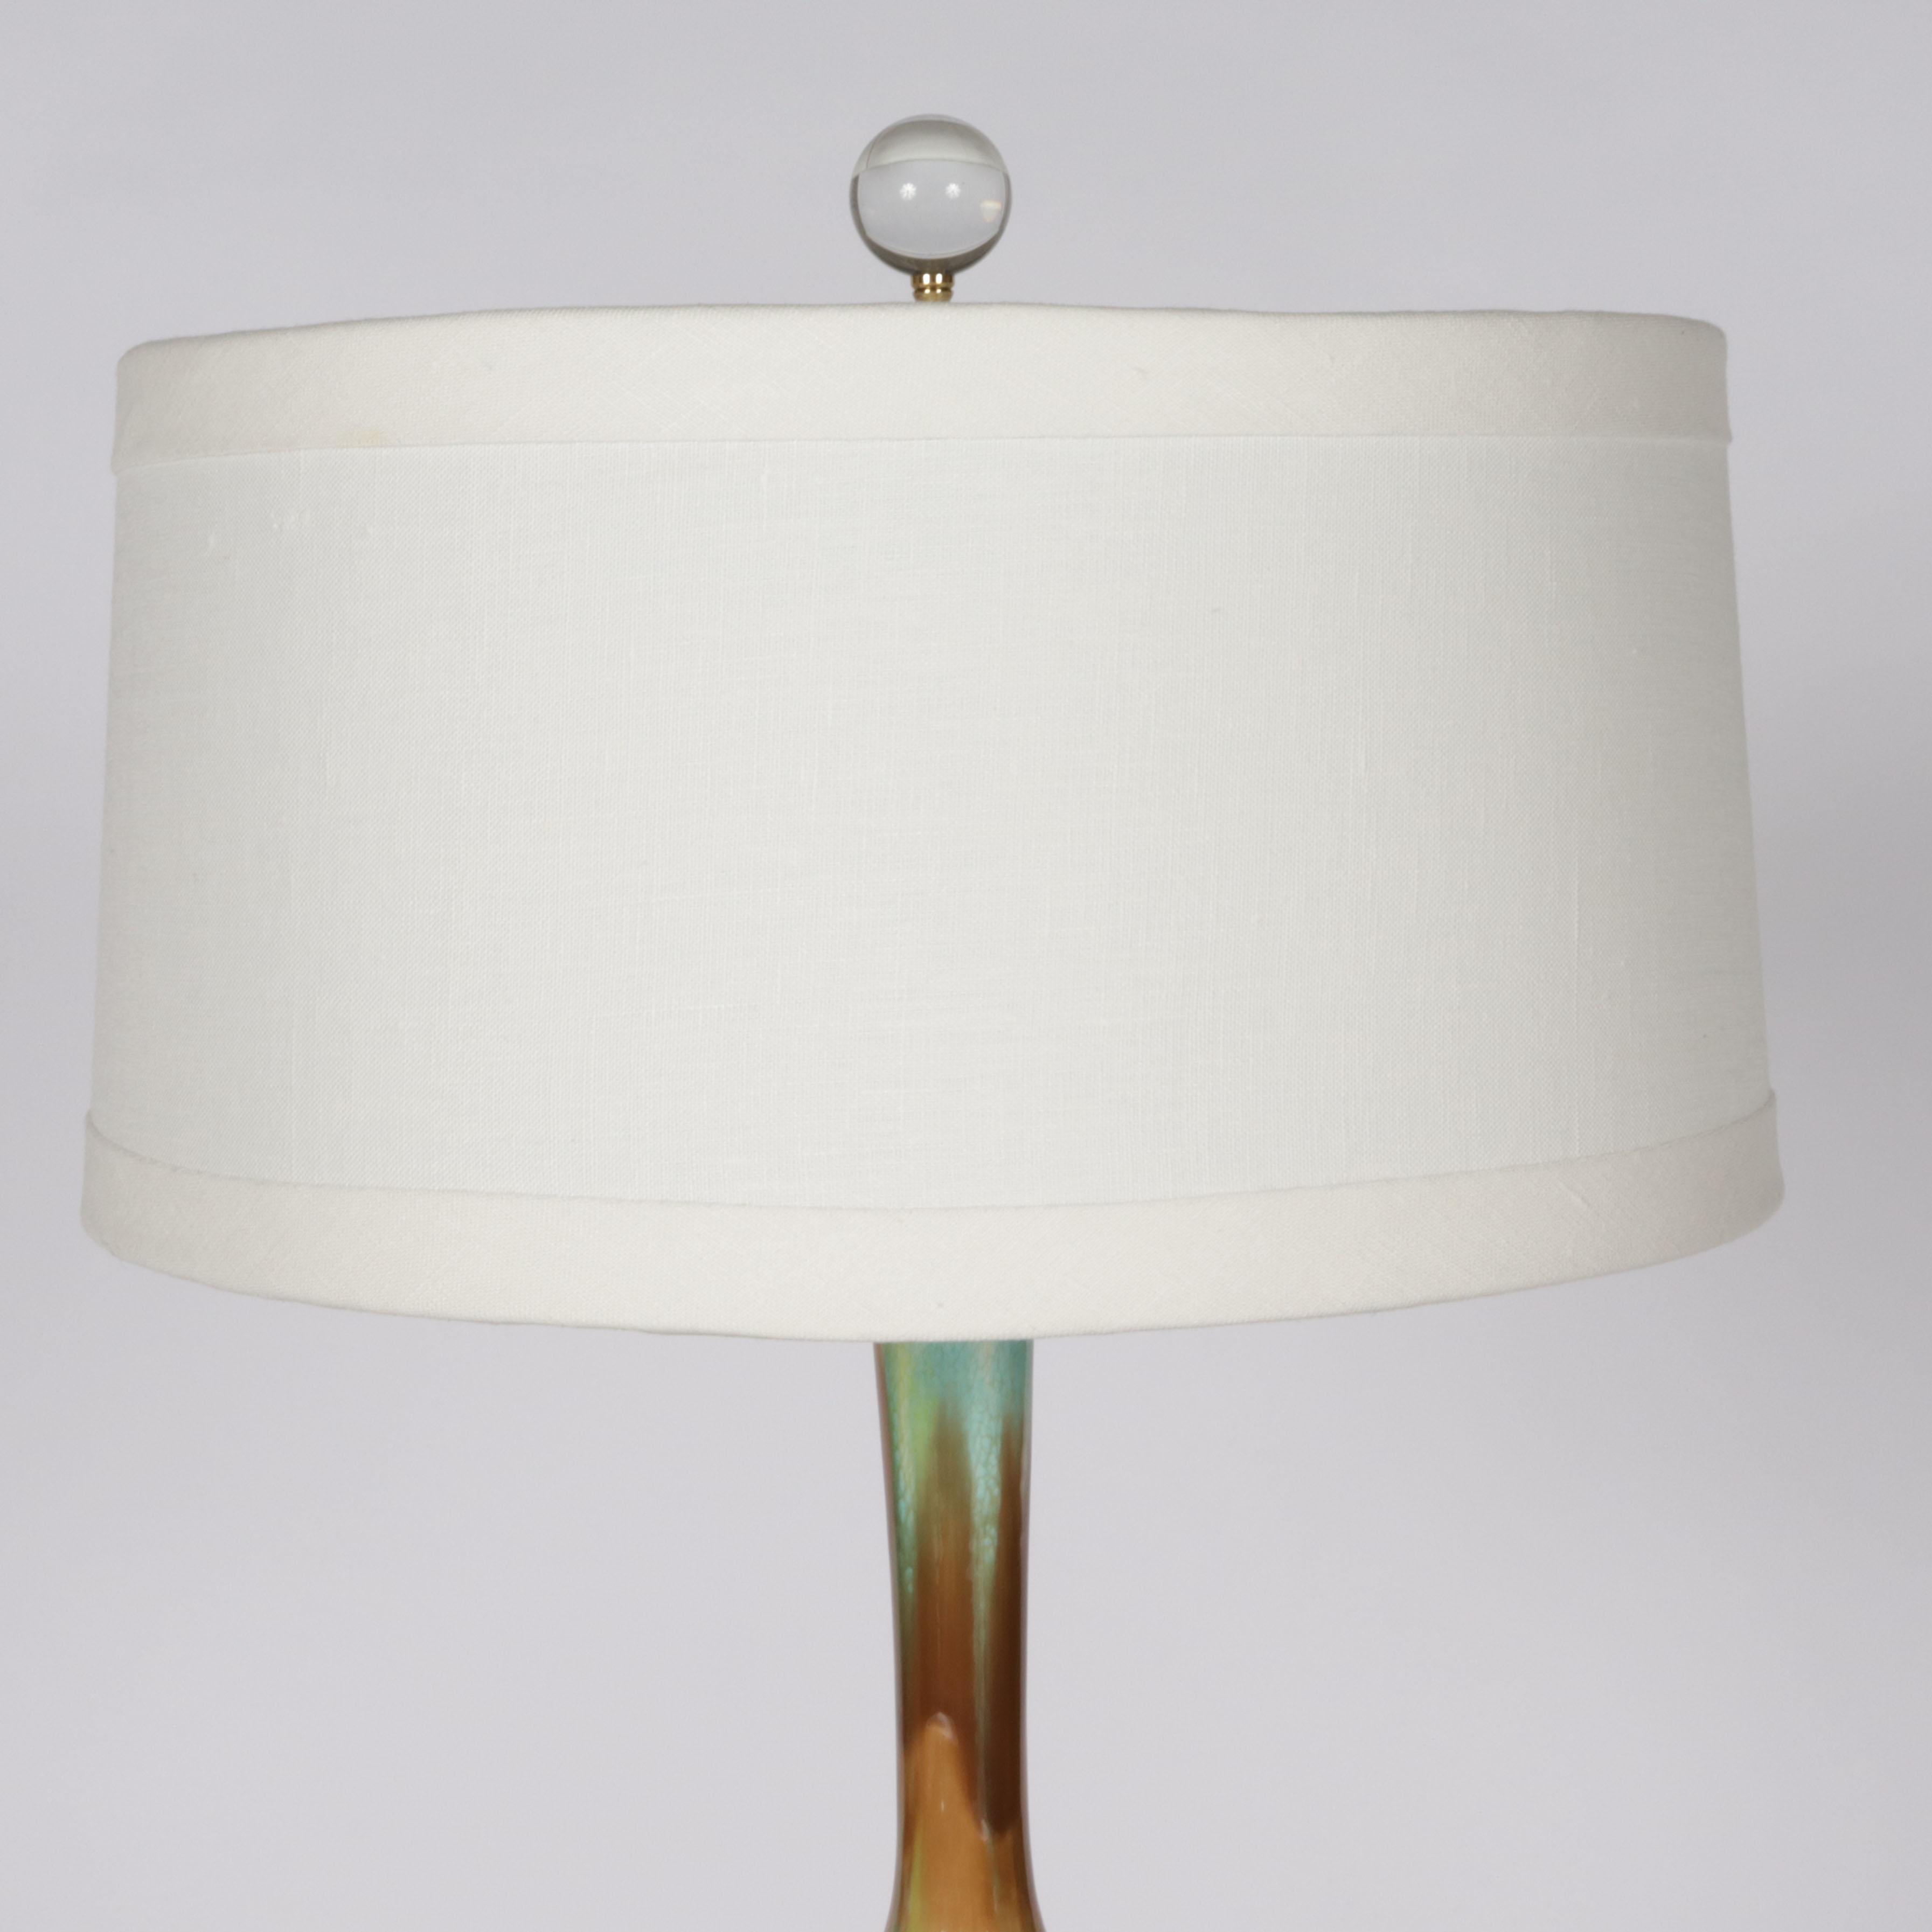 Turquoise, Brown, and Green Ceramic Lamp, C. 1960 For Sale 2